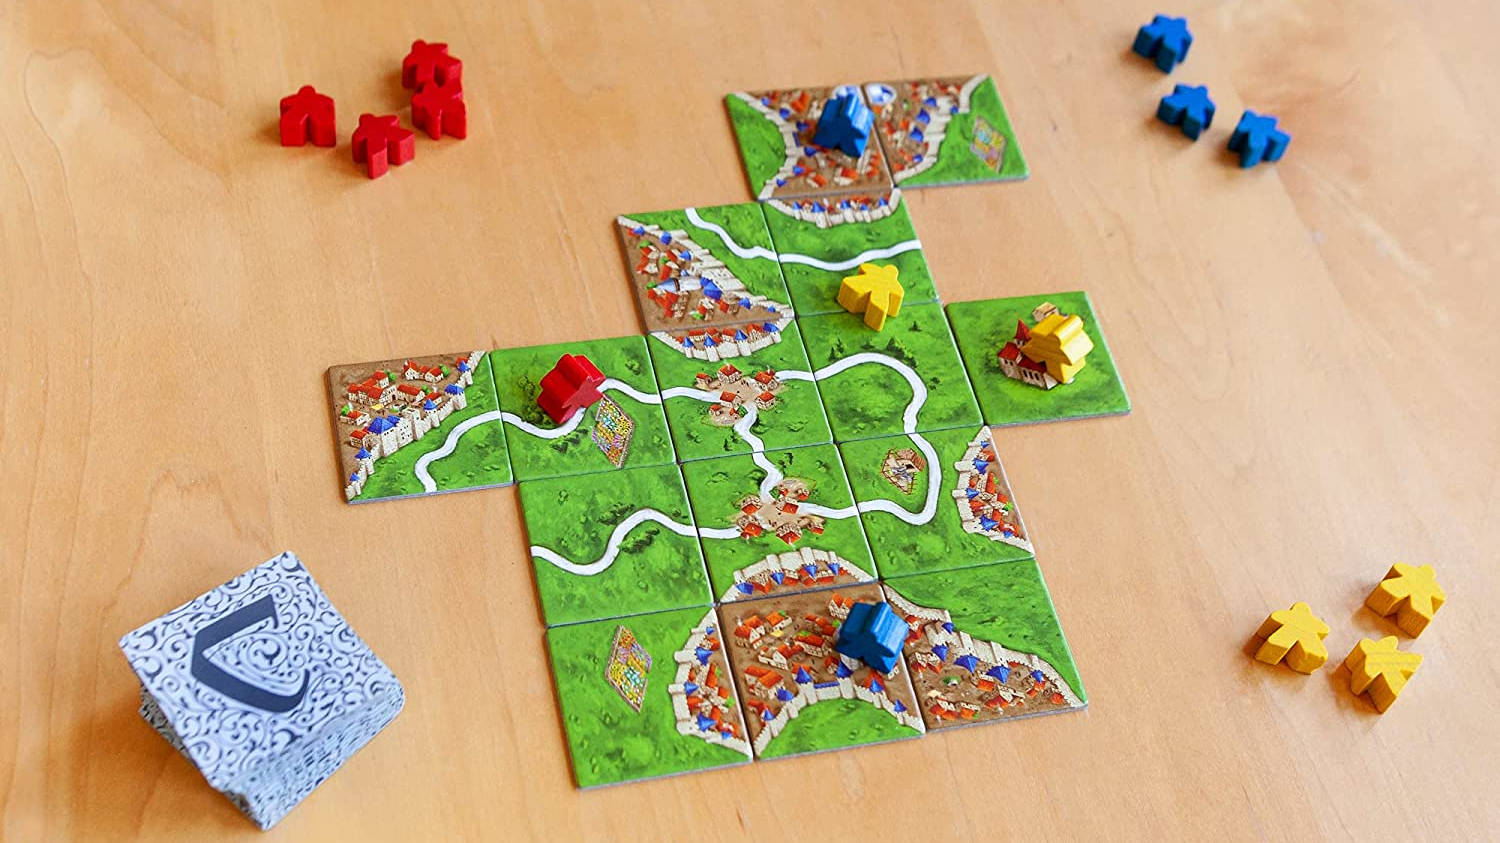 Fun board games Carcassonne tiles and meeple on a table